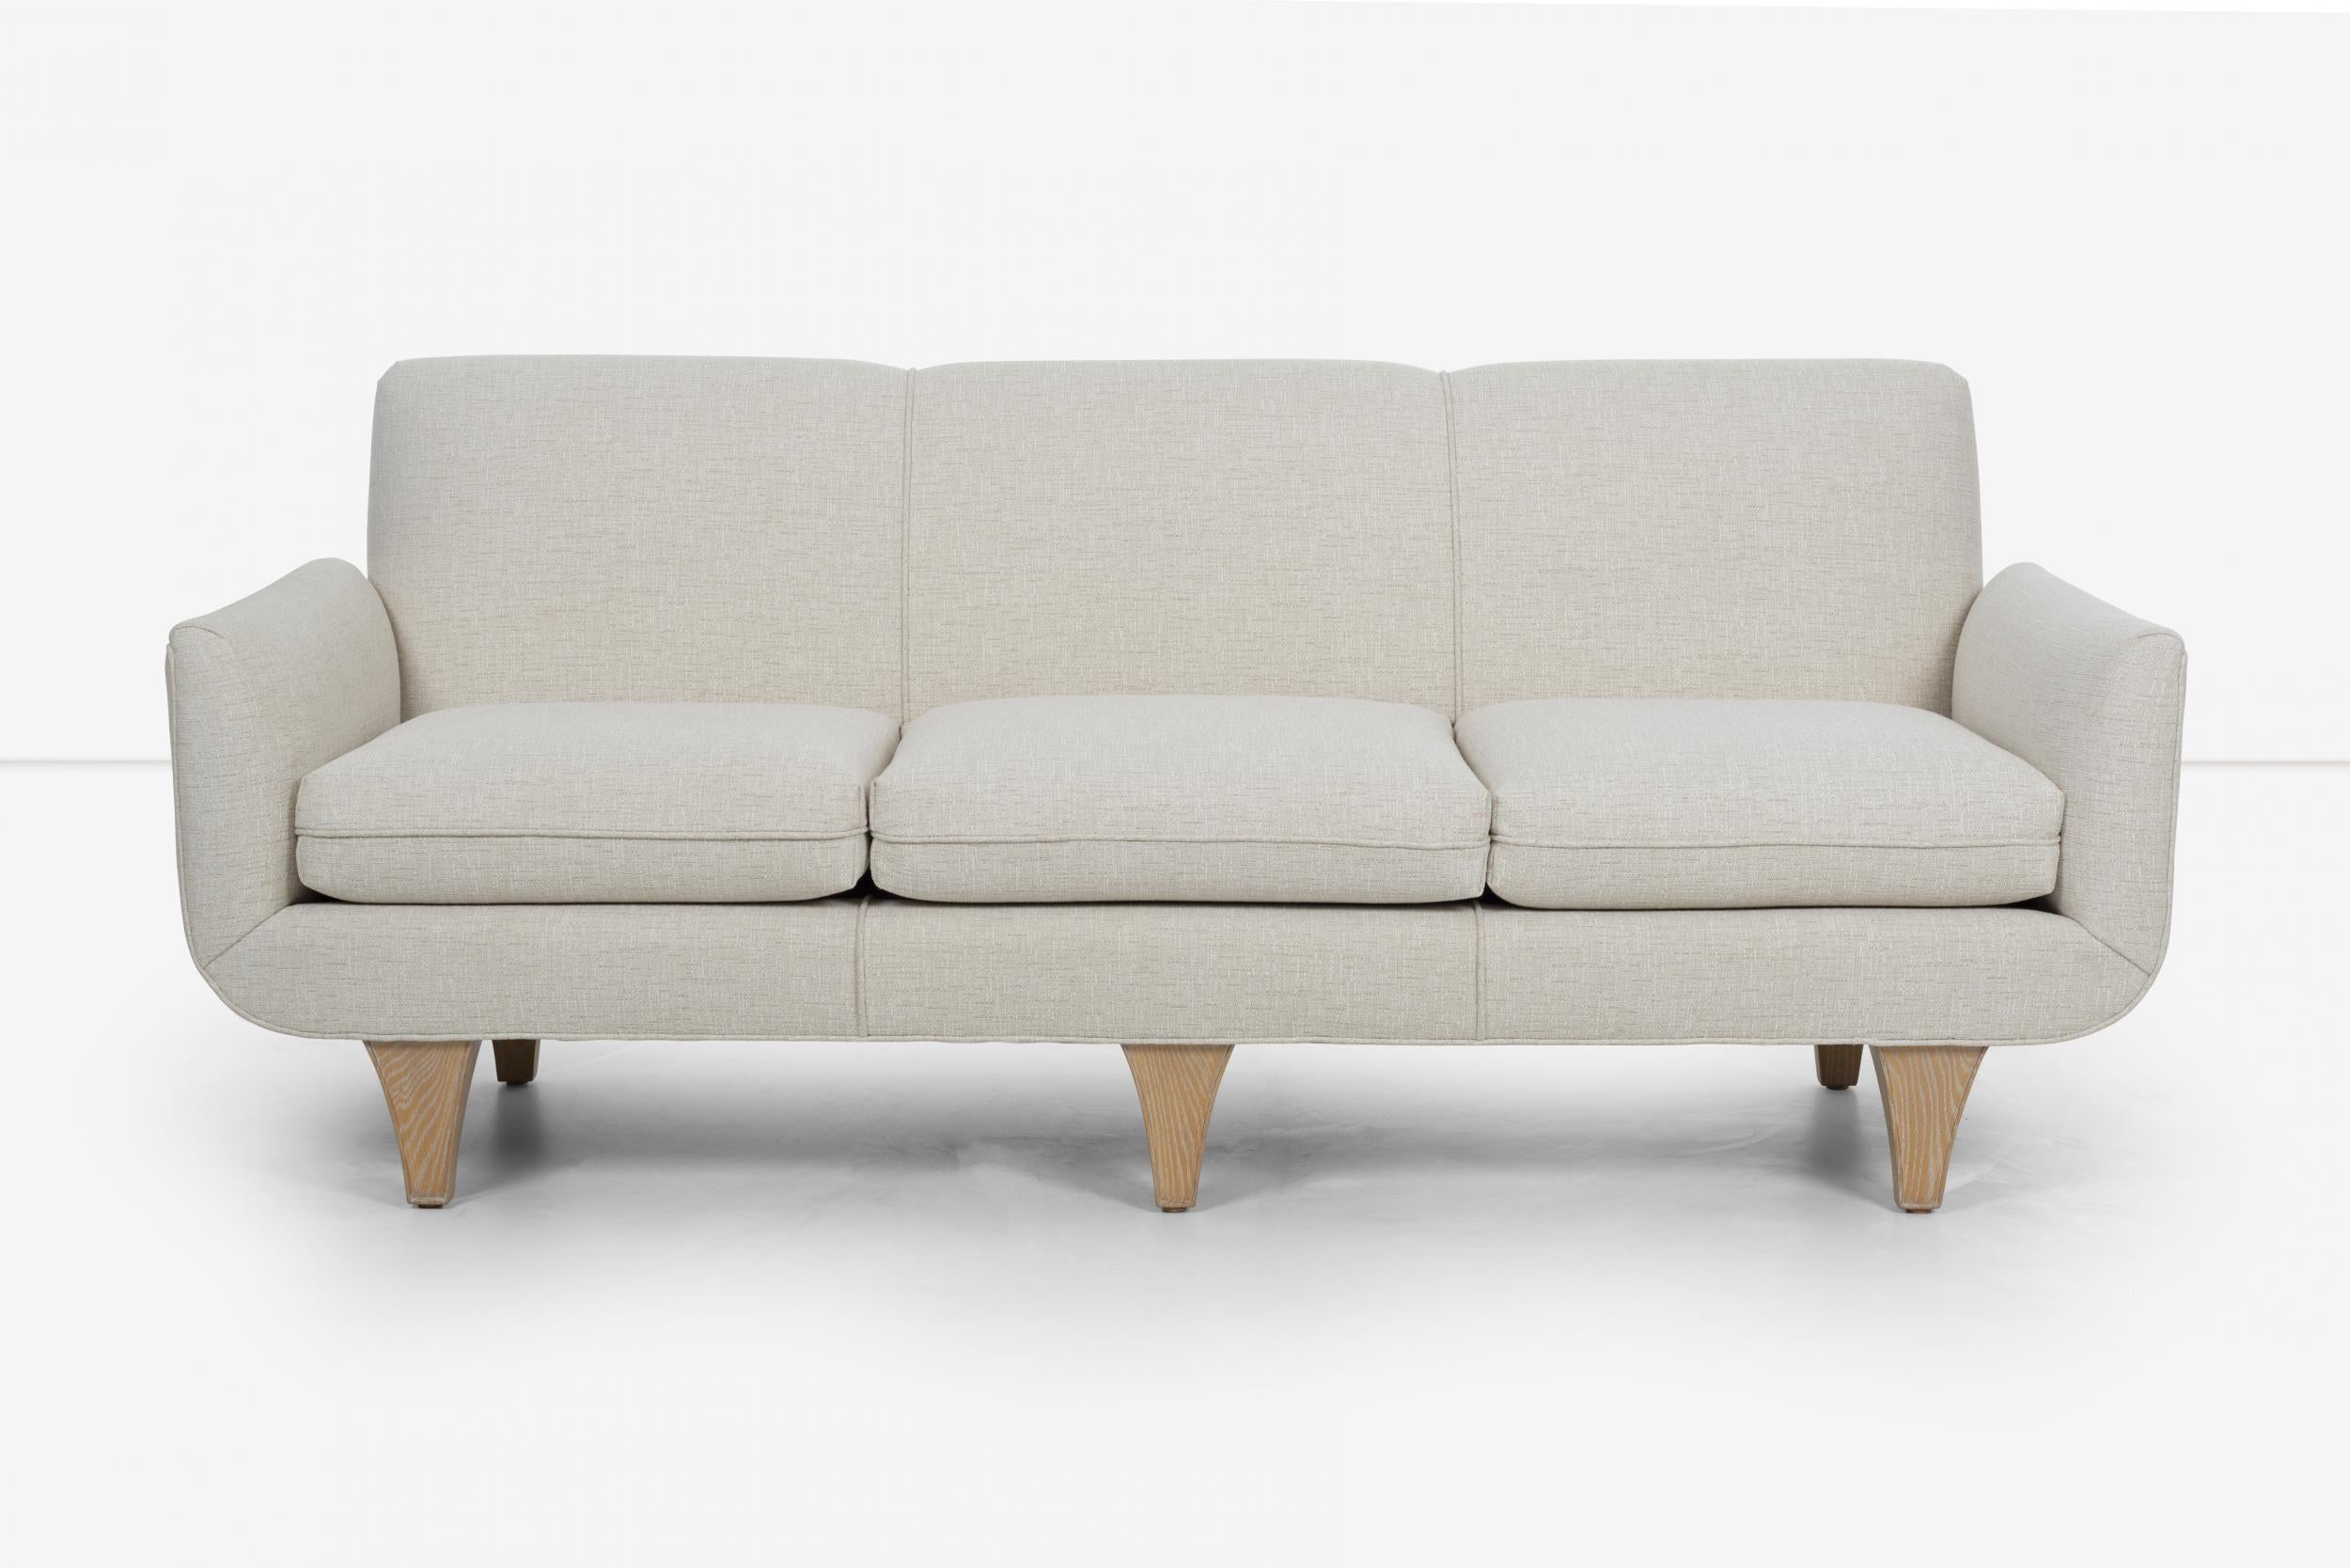 Tommi Parzinger sofa for Parzinger Originals, ceruse oak solid legs, fully restored and reupholstered with great plains cotton-poly.